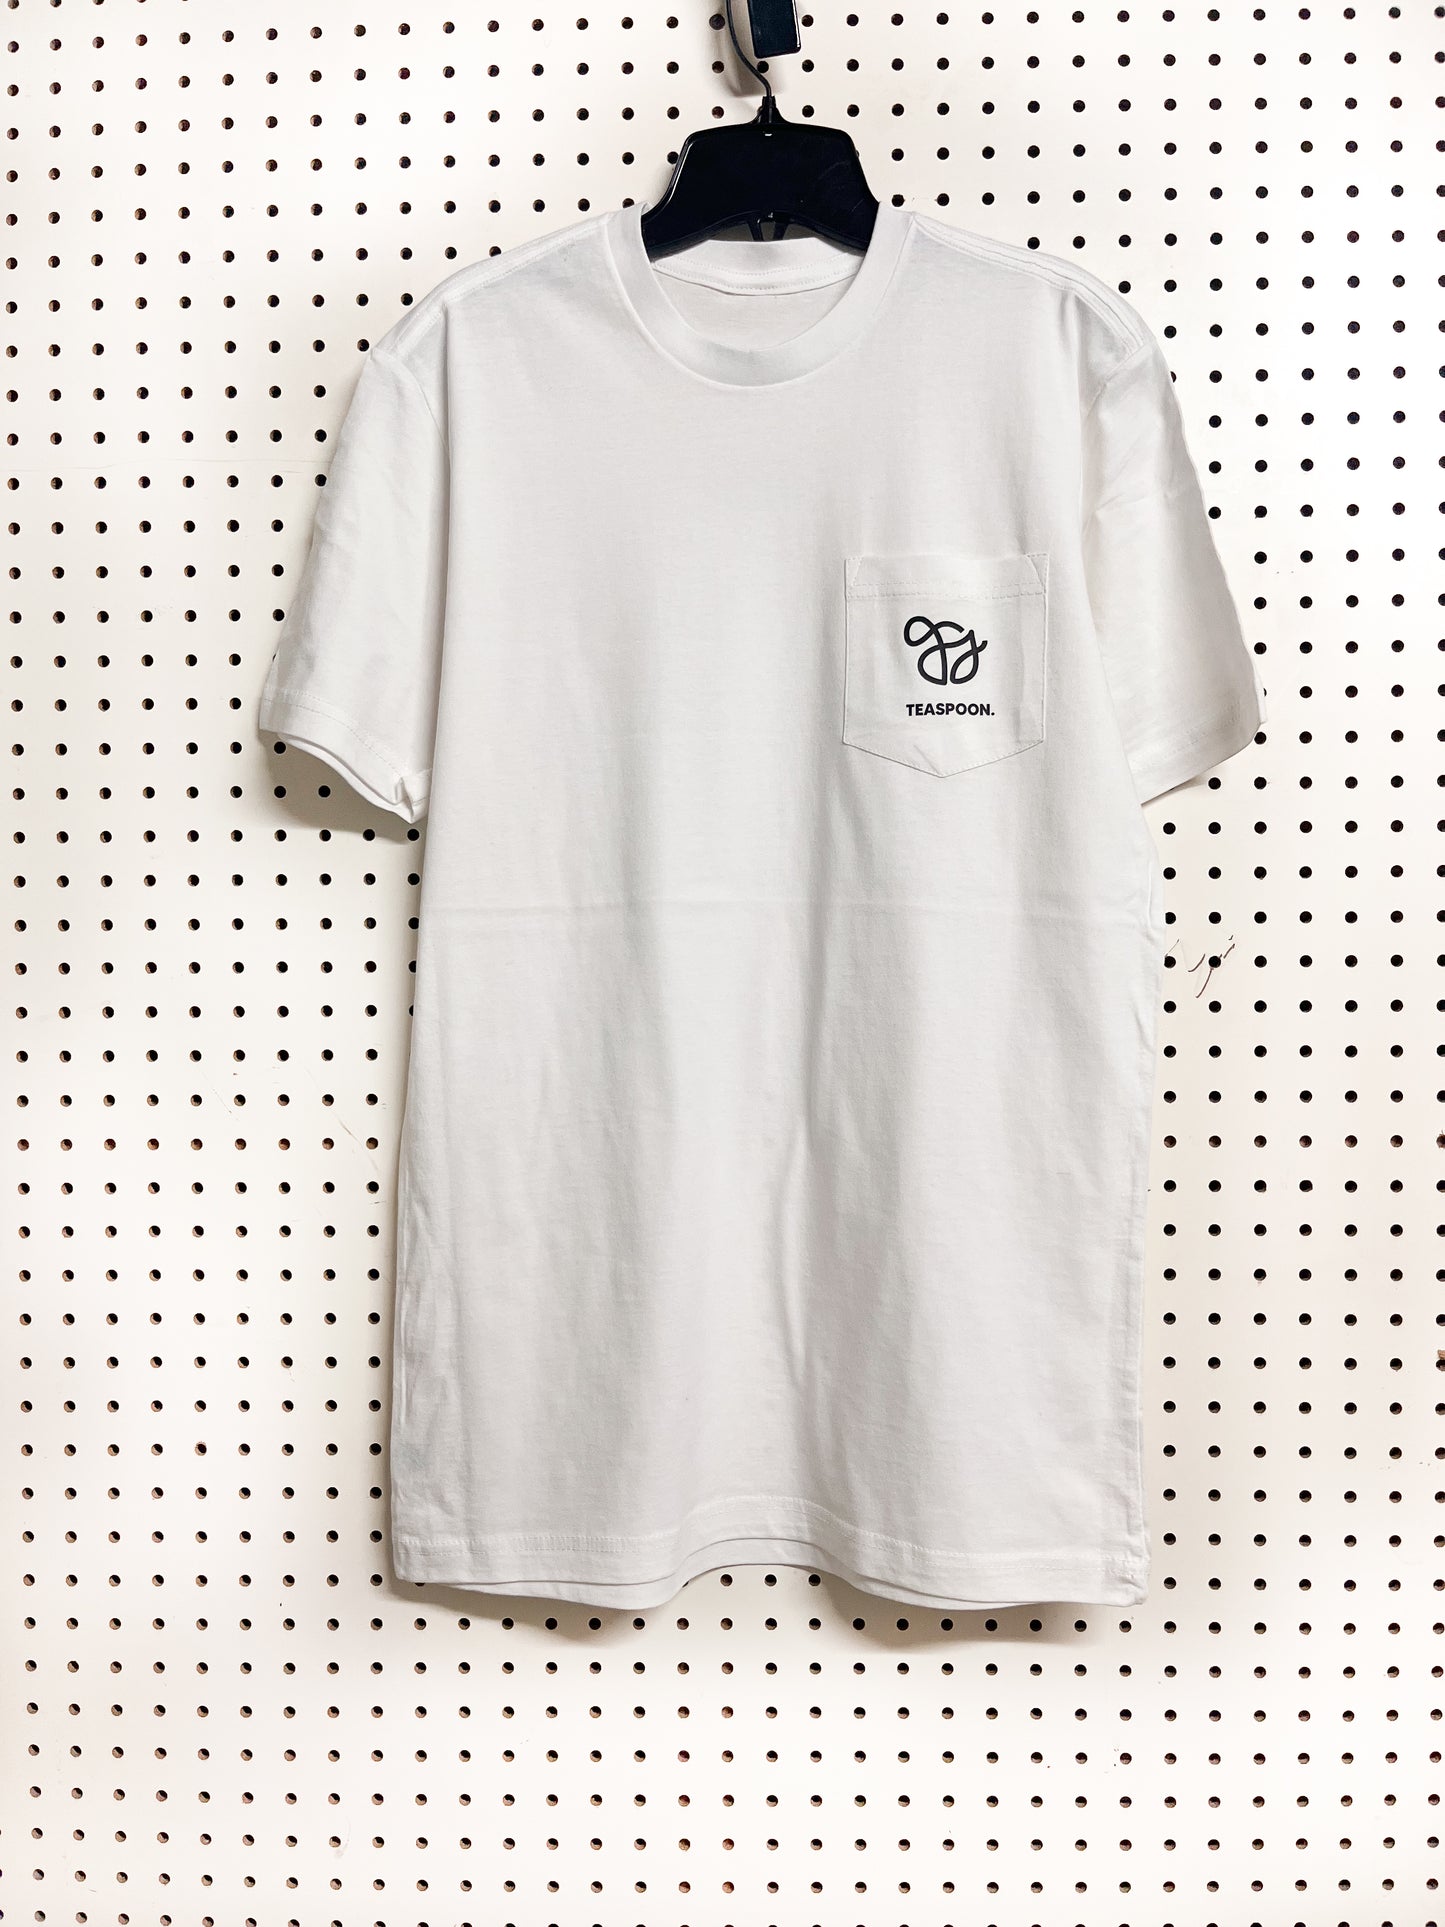 TS - recycled pocket tee - white